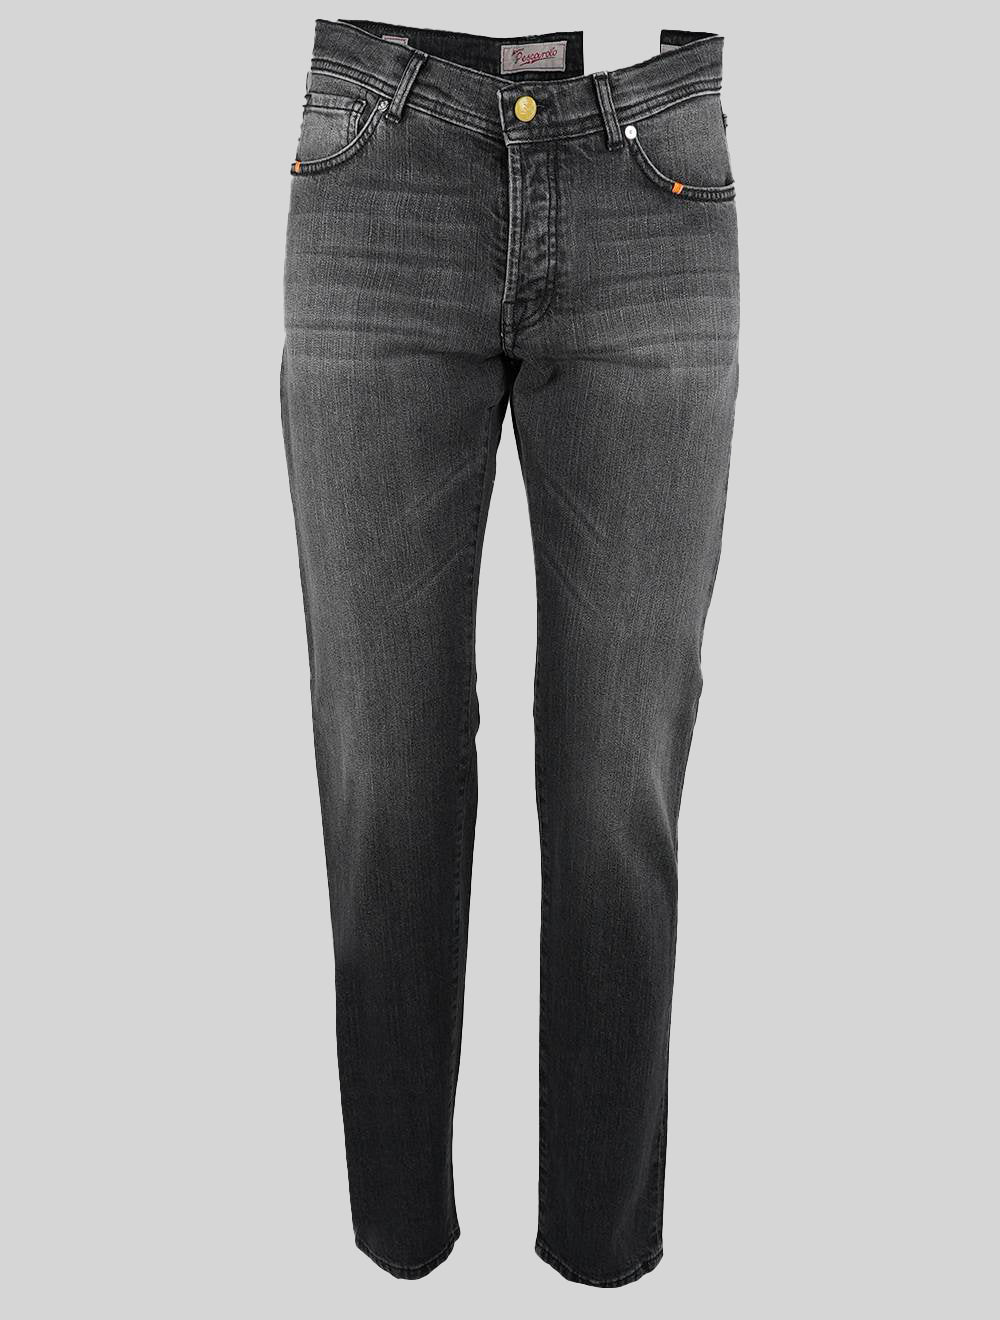 Marco Pescarolo Jeans Made in Italy – 2Men